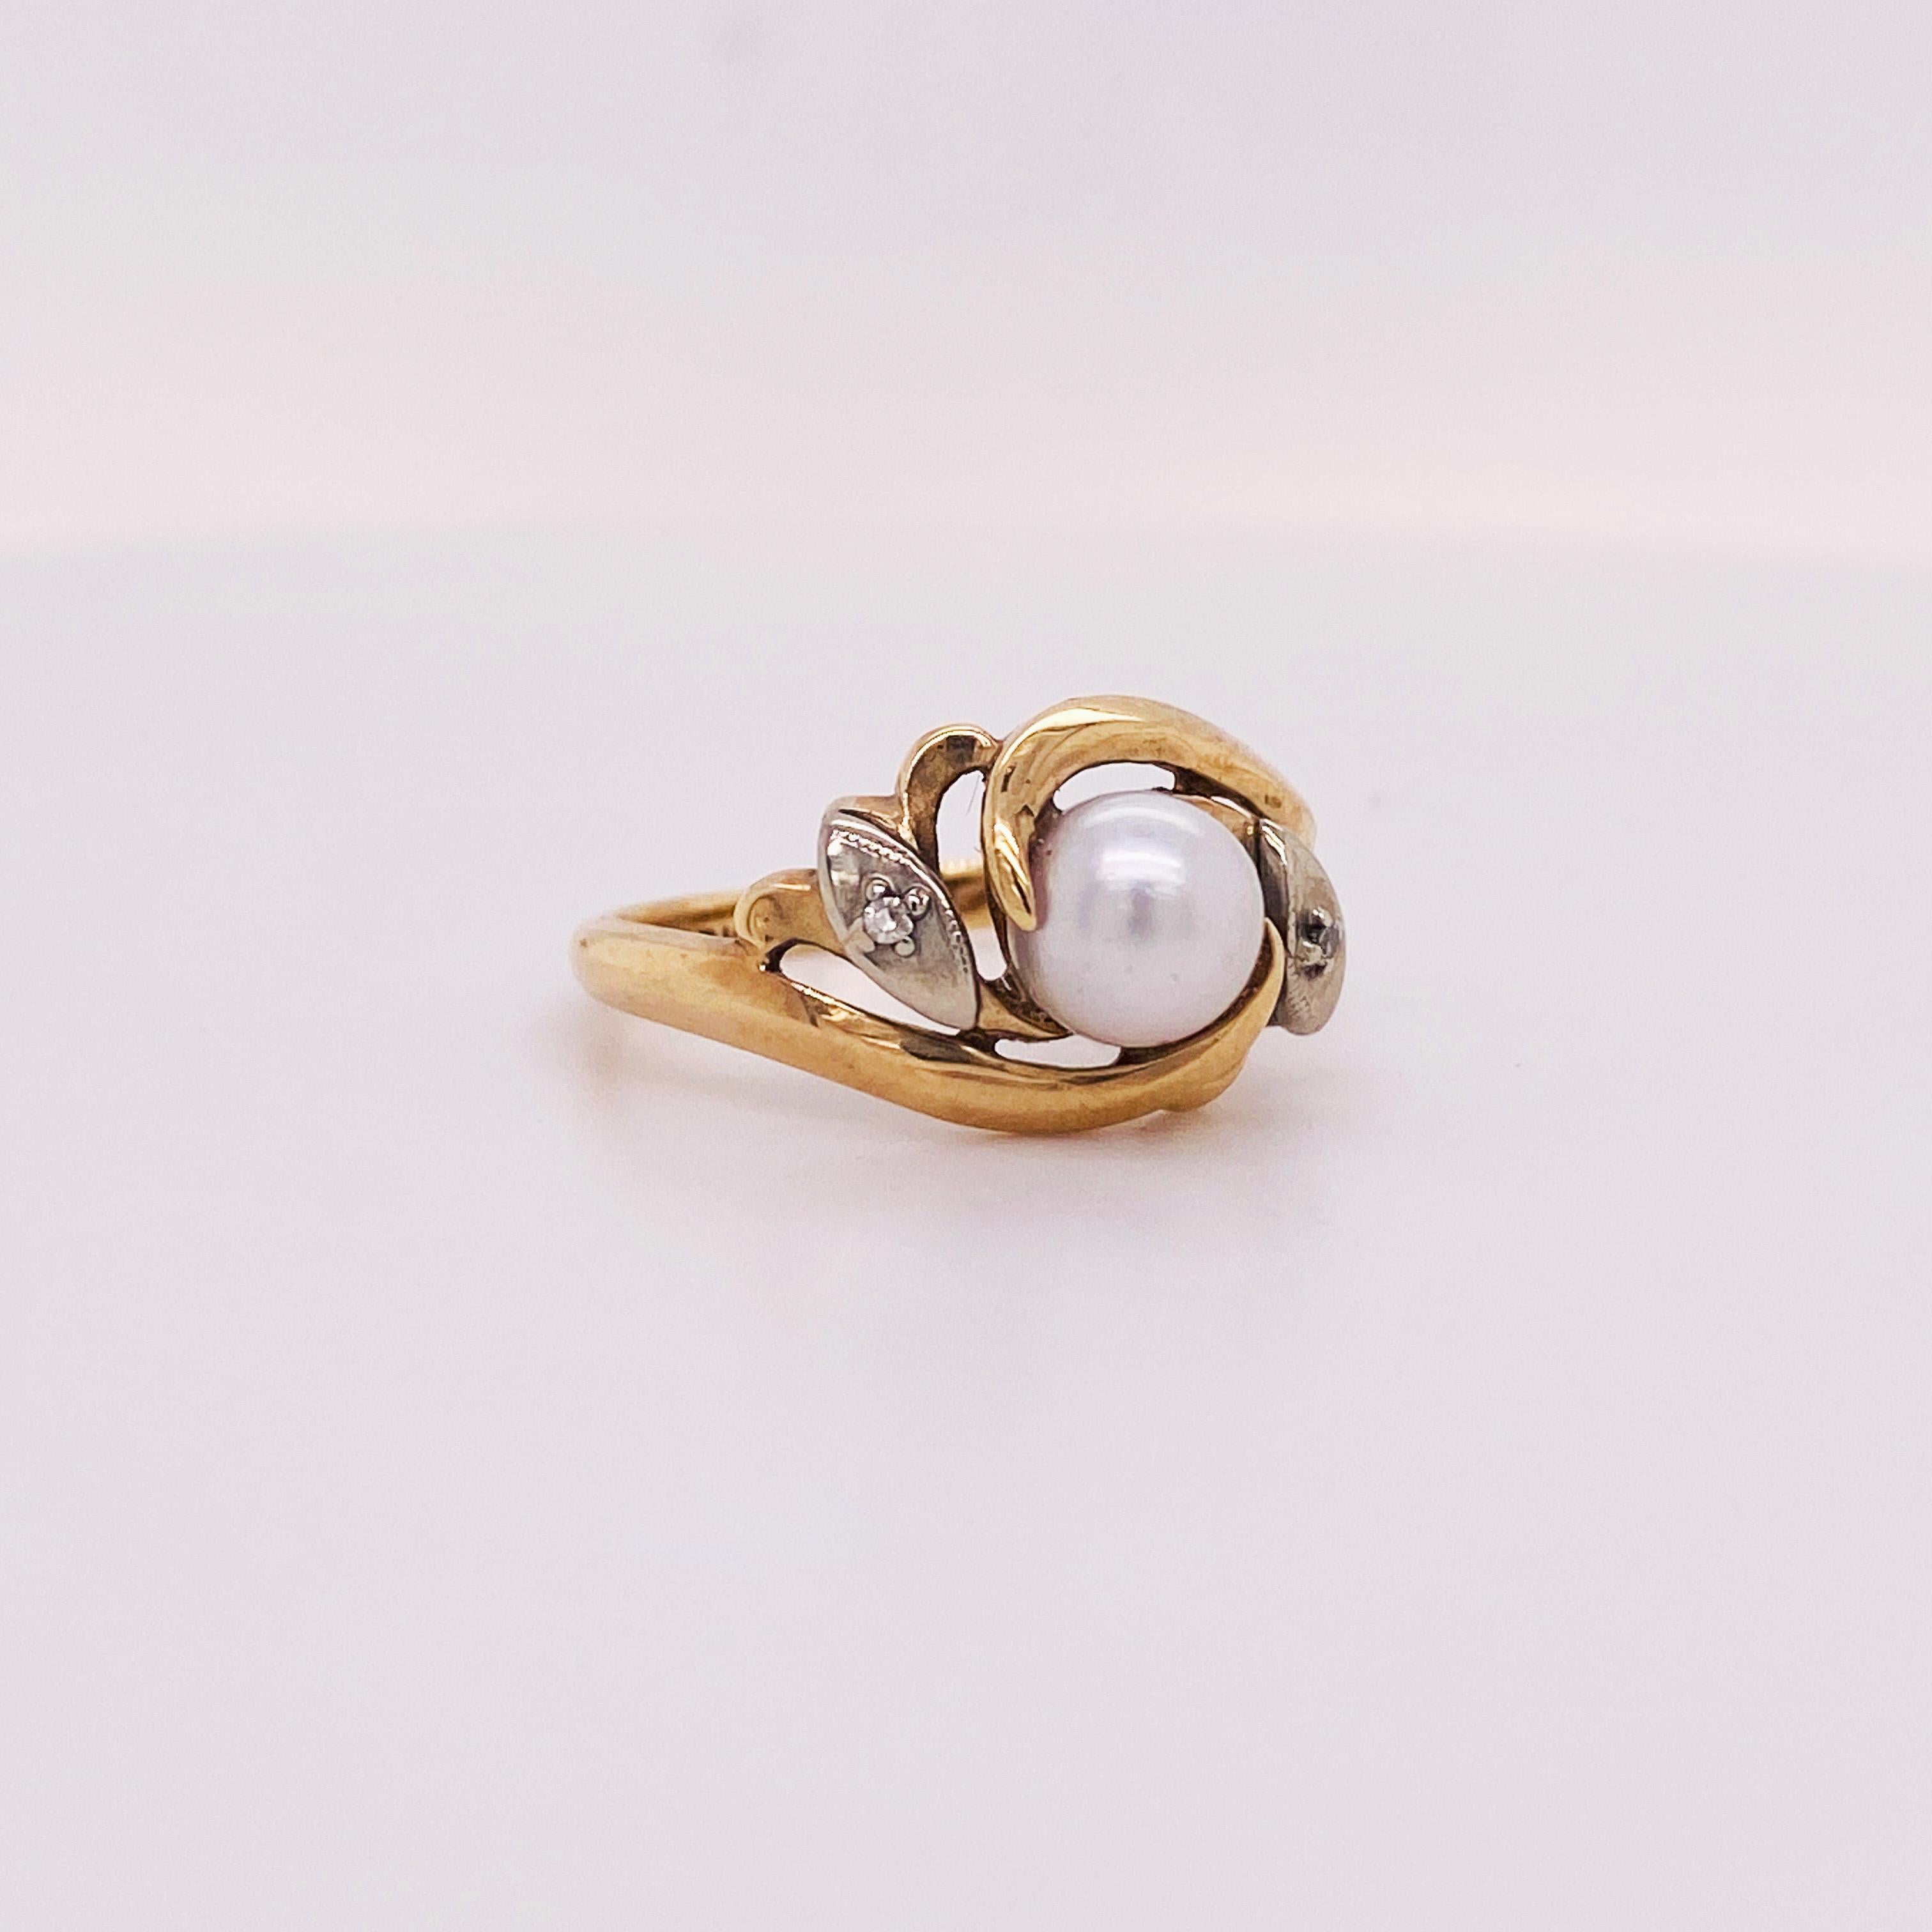 10k gold pearl ring